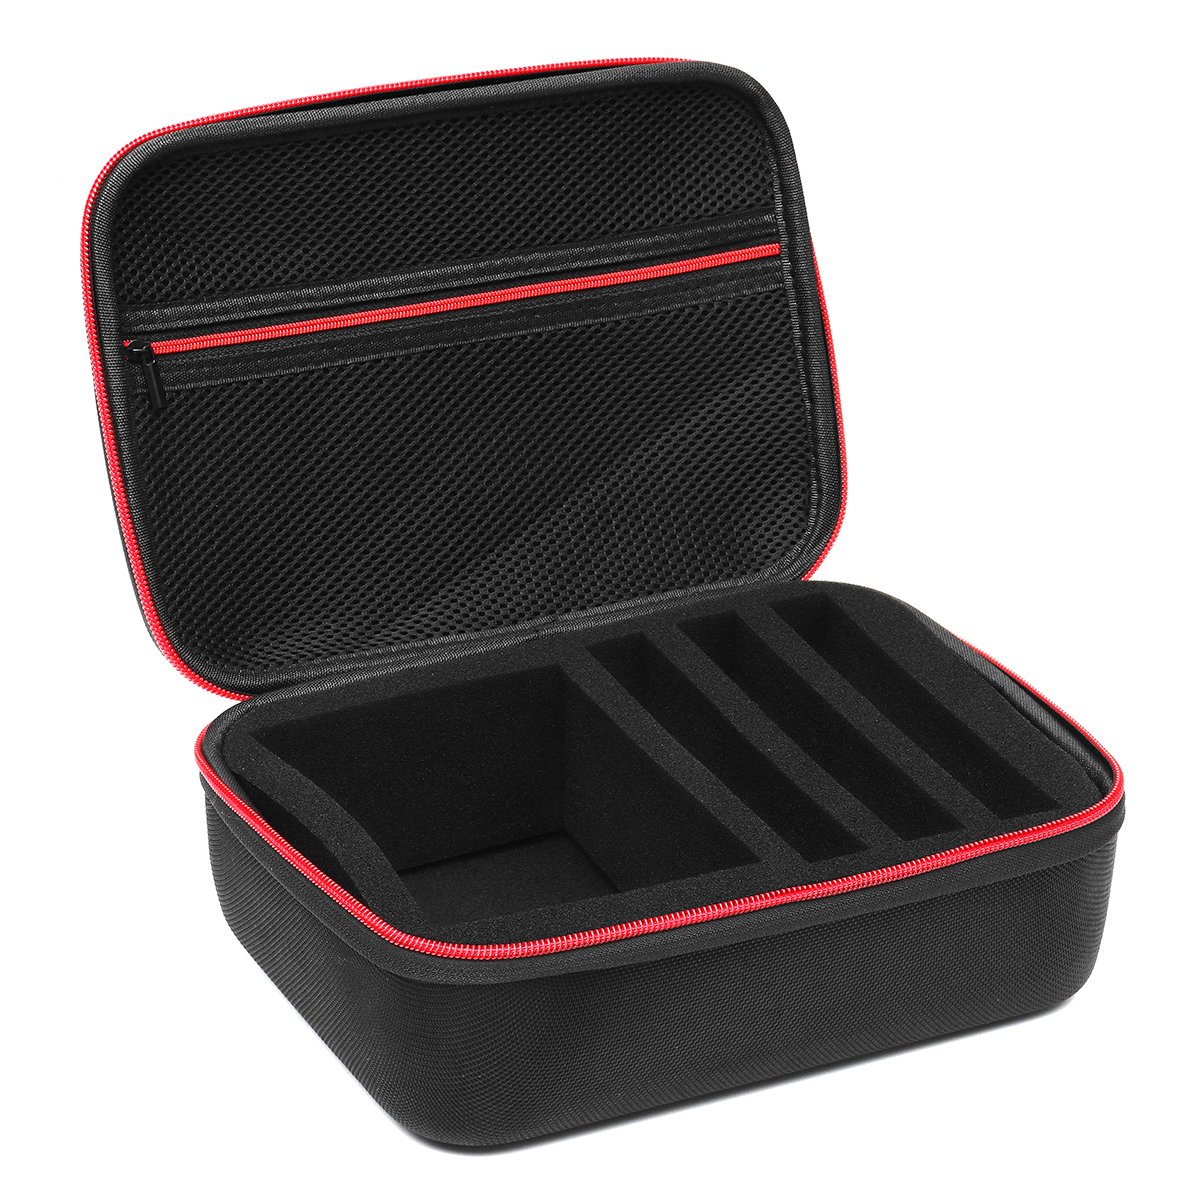 Portable Travel Storage Box Carry Case Bag For Nintendo Switch MINI SFC Game Console 1